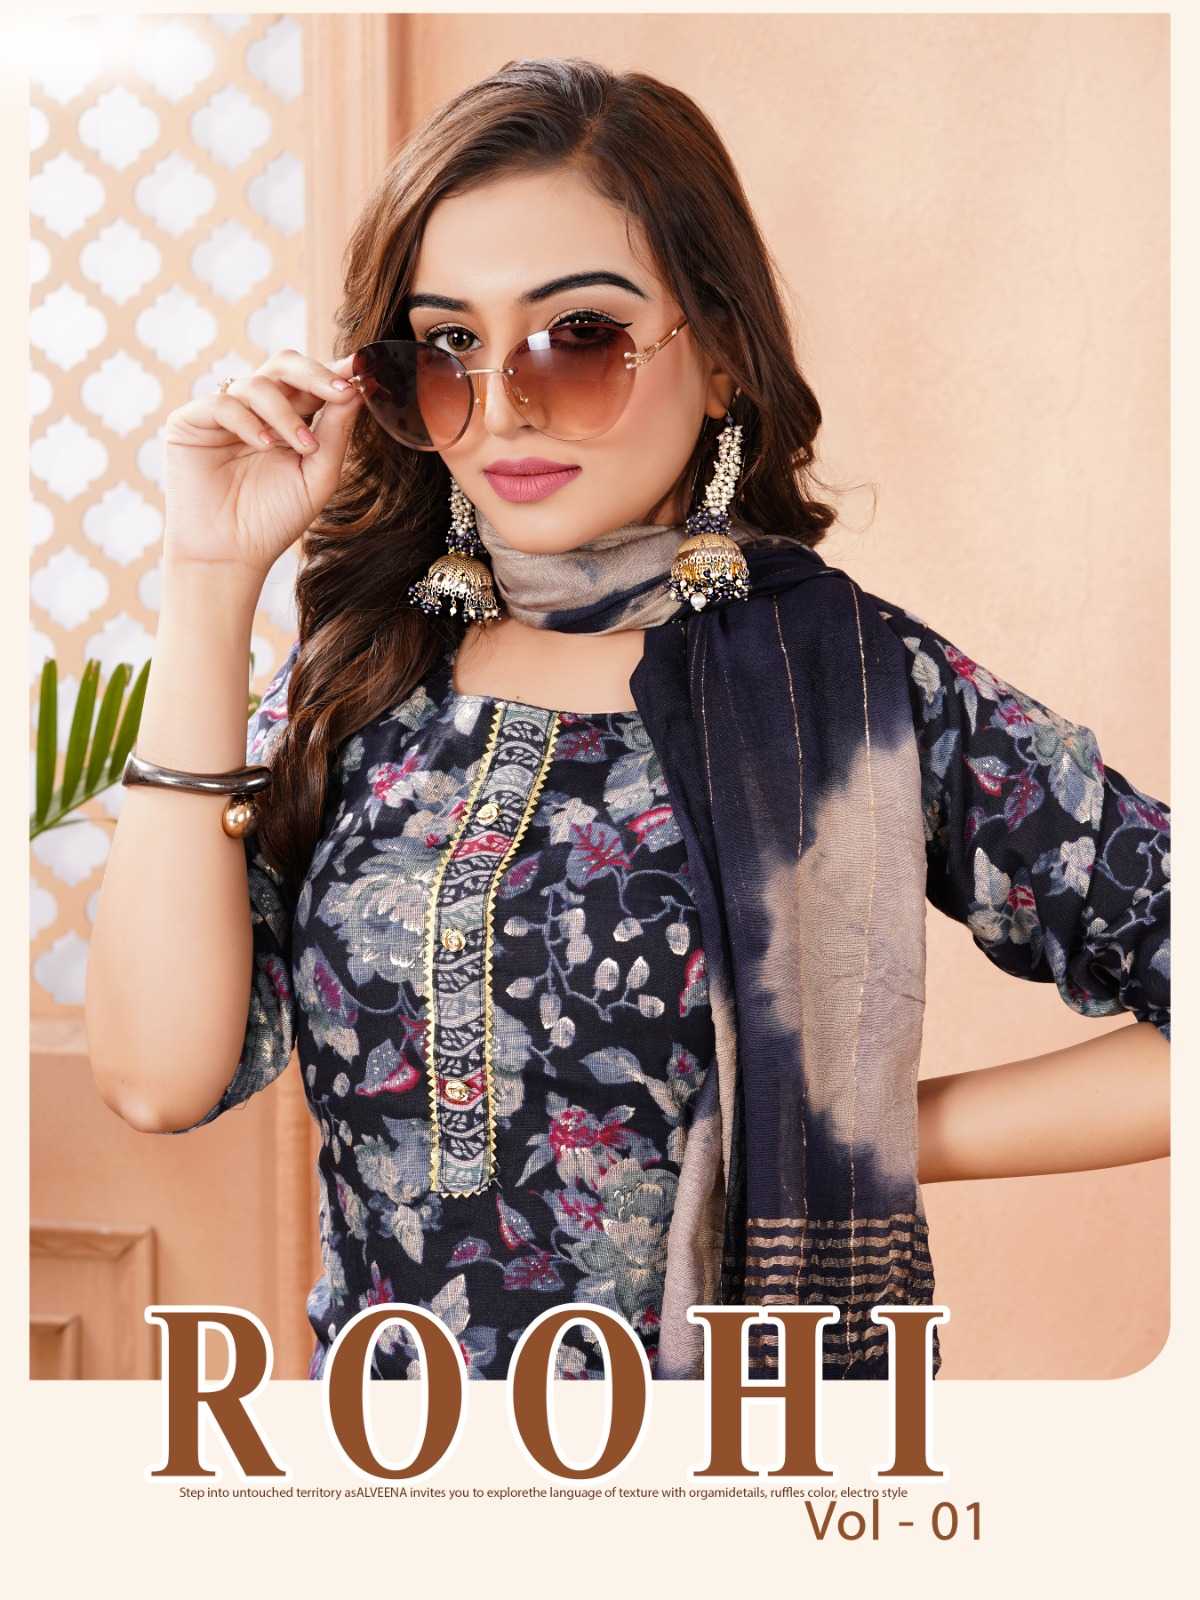 SAI DRESSES PRESENT ROOHI VOL 1 READY TO DAILY WEAR CAPSUL PRINTED PANT STYLE 3 PIECE SUITS IN WHOLESALE RATE IN SURAT